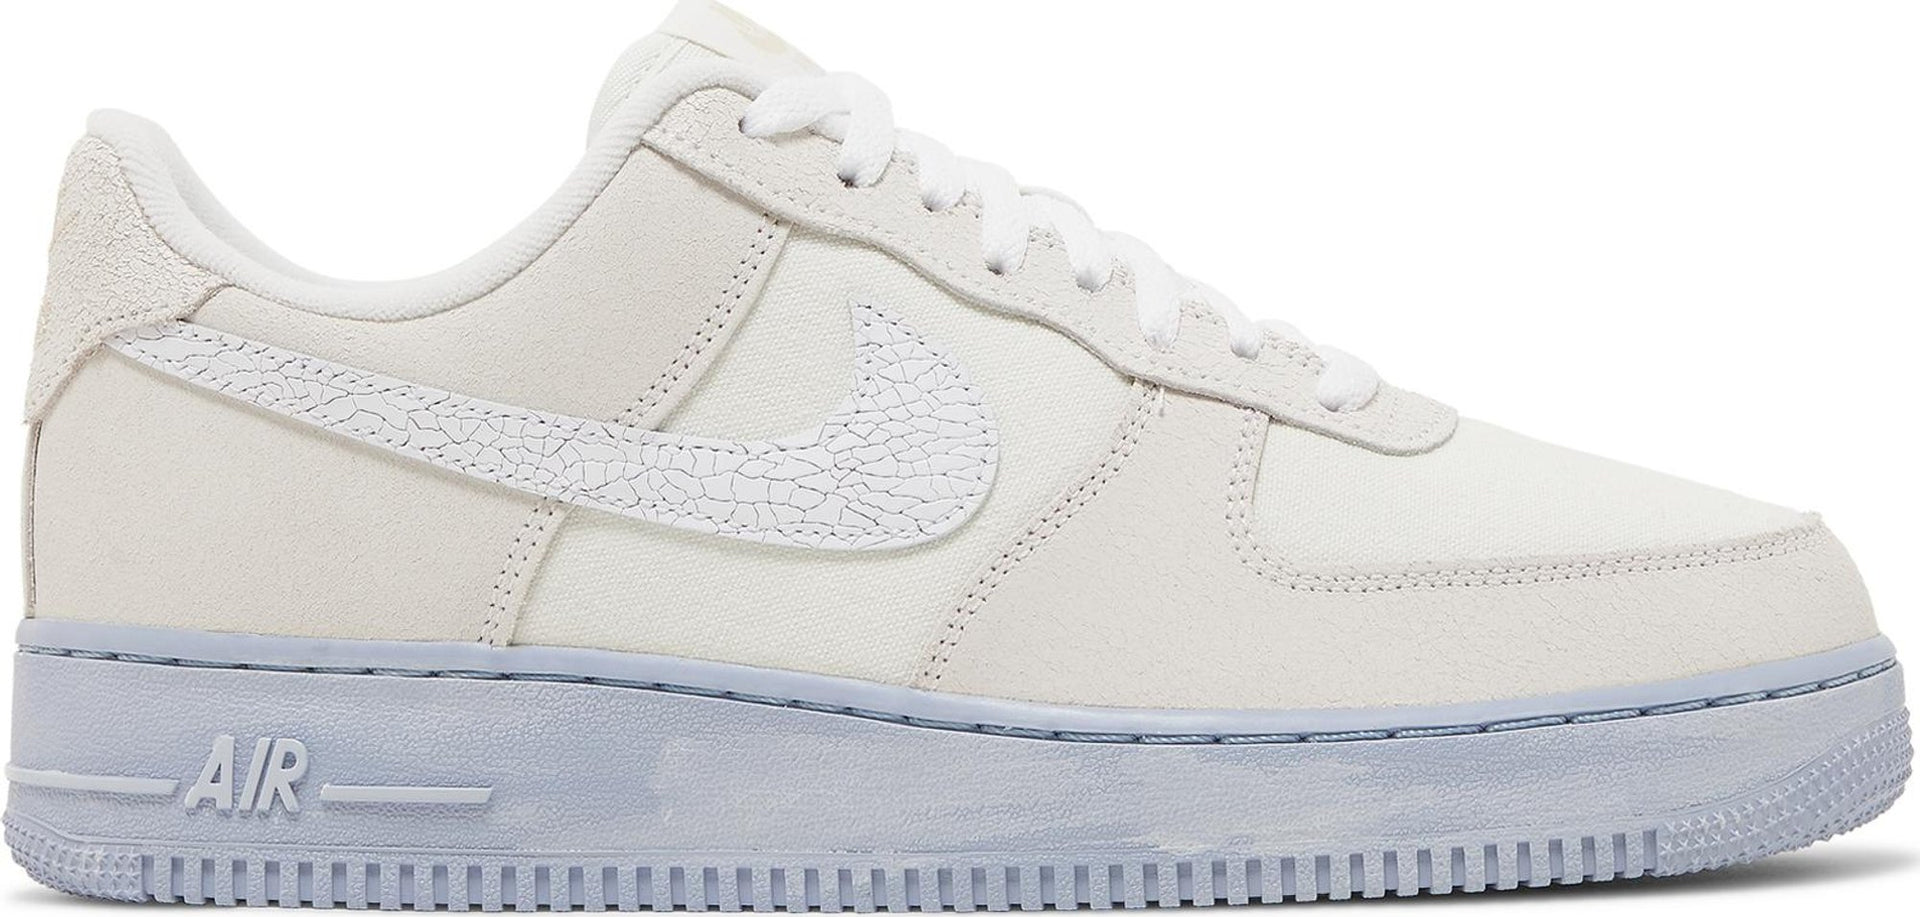 Nike Air Force 1 Low '07 LV8 Pearl White Sesame DQ7660-200 Men's Size 8.5  Shoes